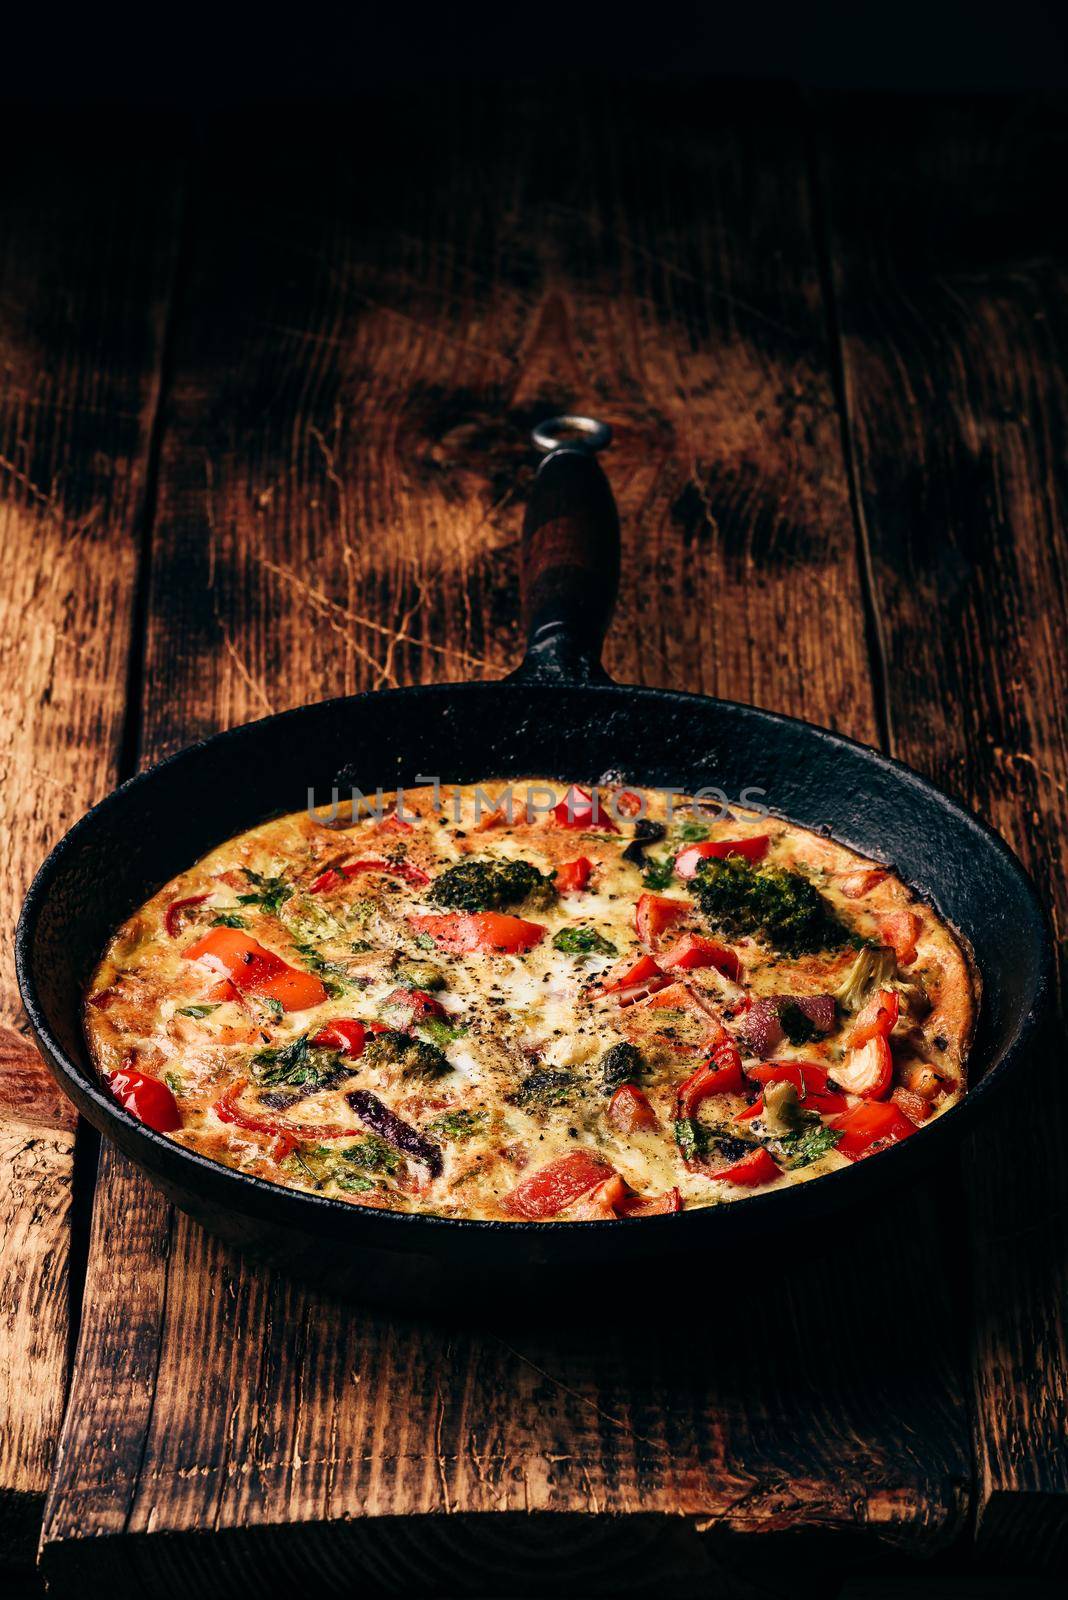 Vegetable frittata with broccoli, red bell pepper and red onion in cast iron pan